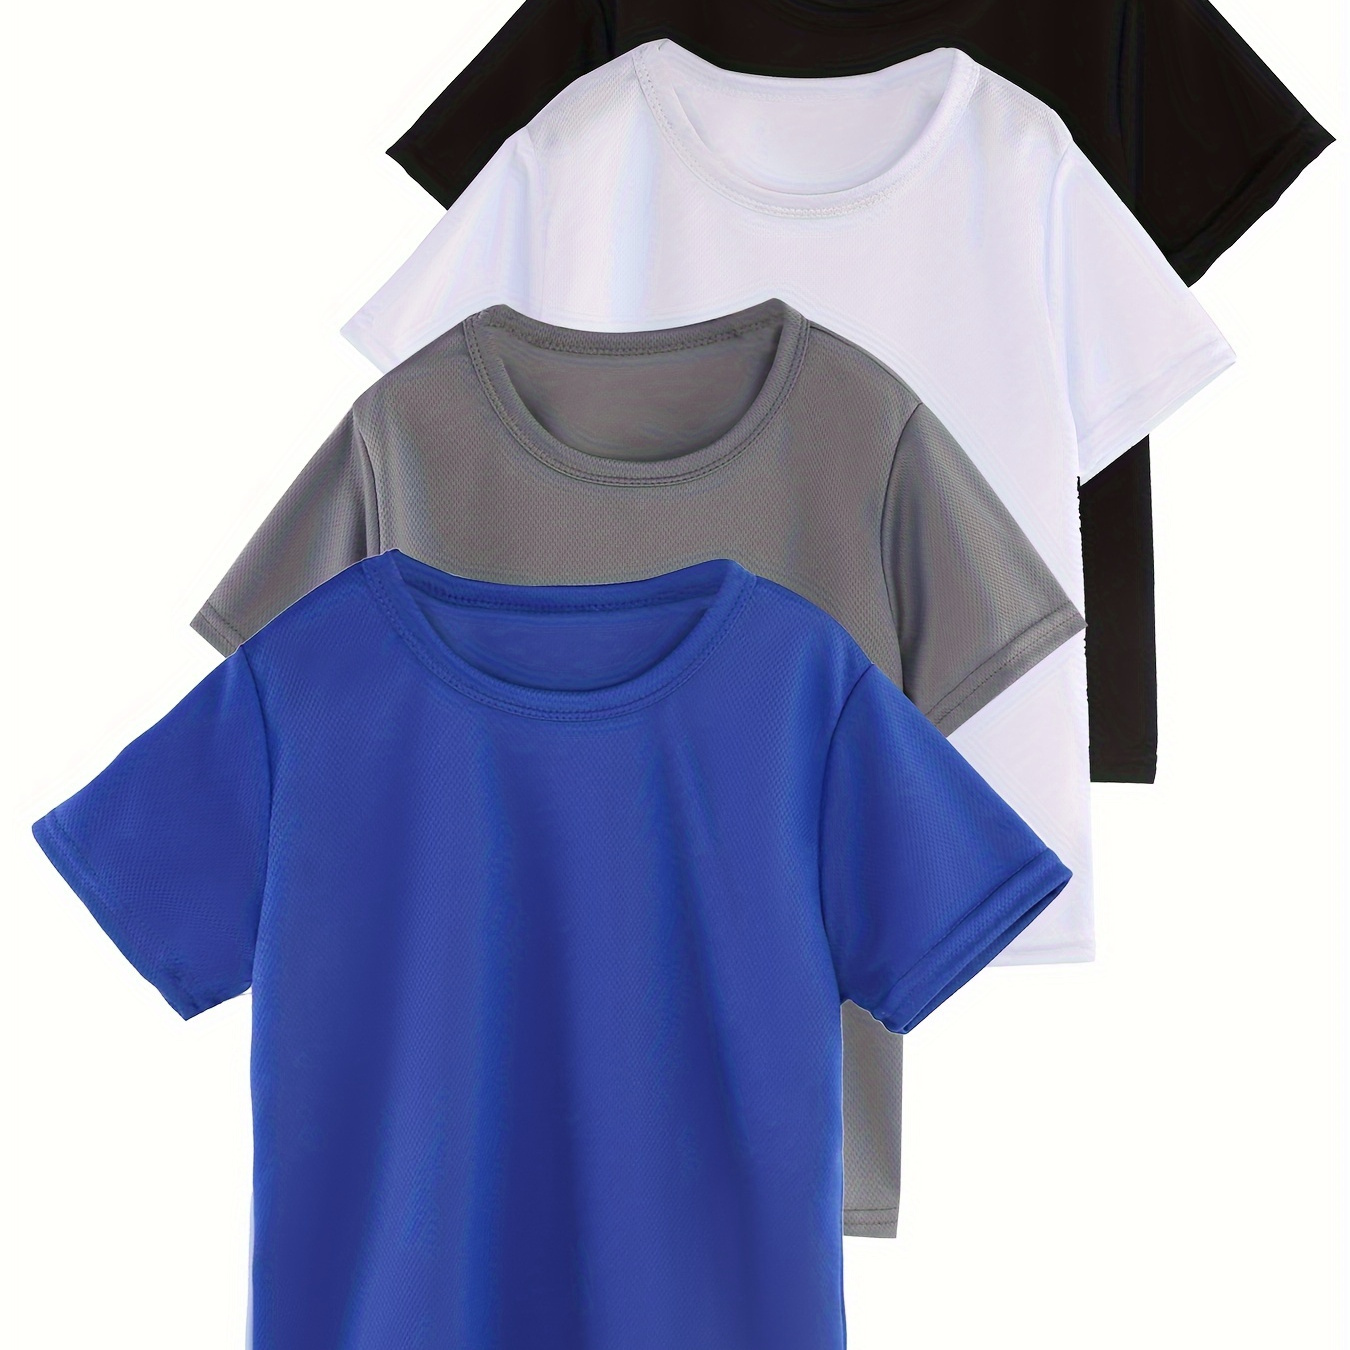 

Boys 4pcs Multi-color Quick-drying Loose Athletic T-shirt, Casual Tee, Everyday Tee, Boys Clothes For Summer